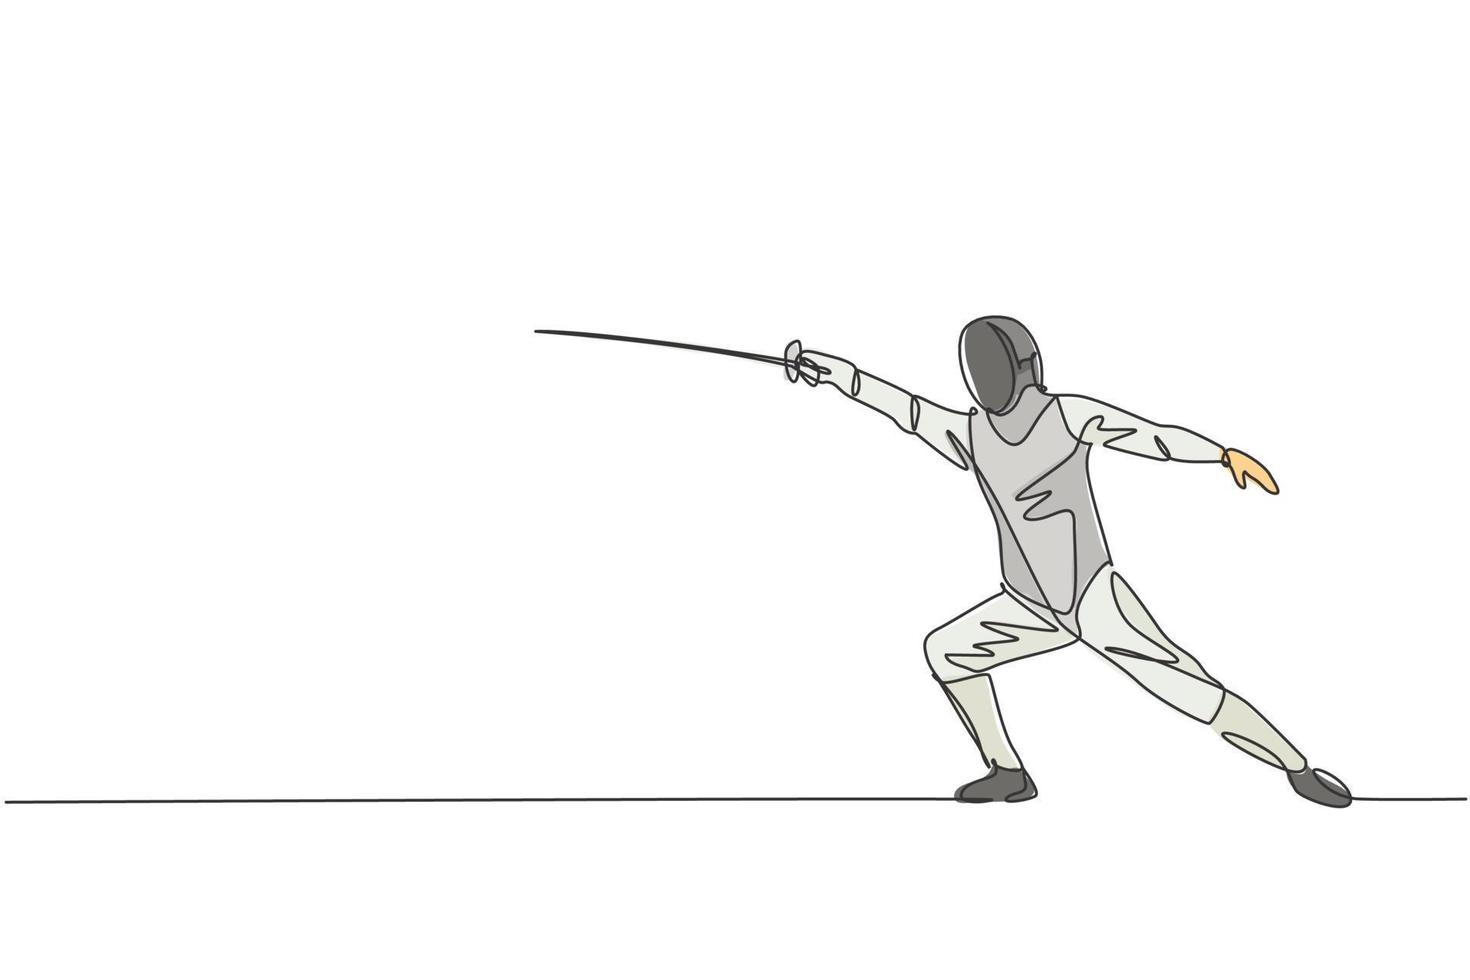 Single continuous line drawing of young professional fencer athlete man in fencing mask and rapier. Competitive fighting sport competition concept. Trendy one line draw design vector illustration